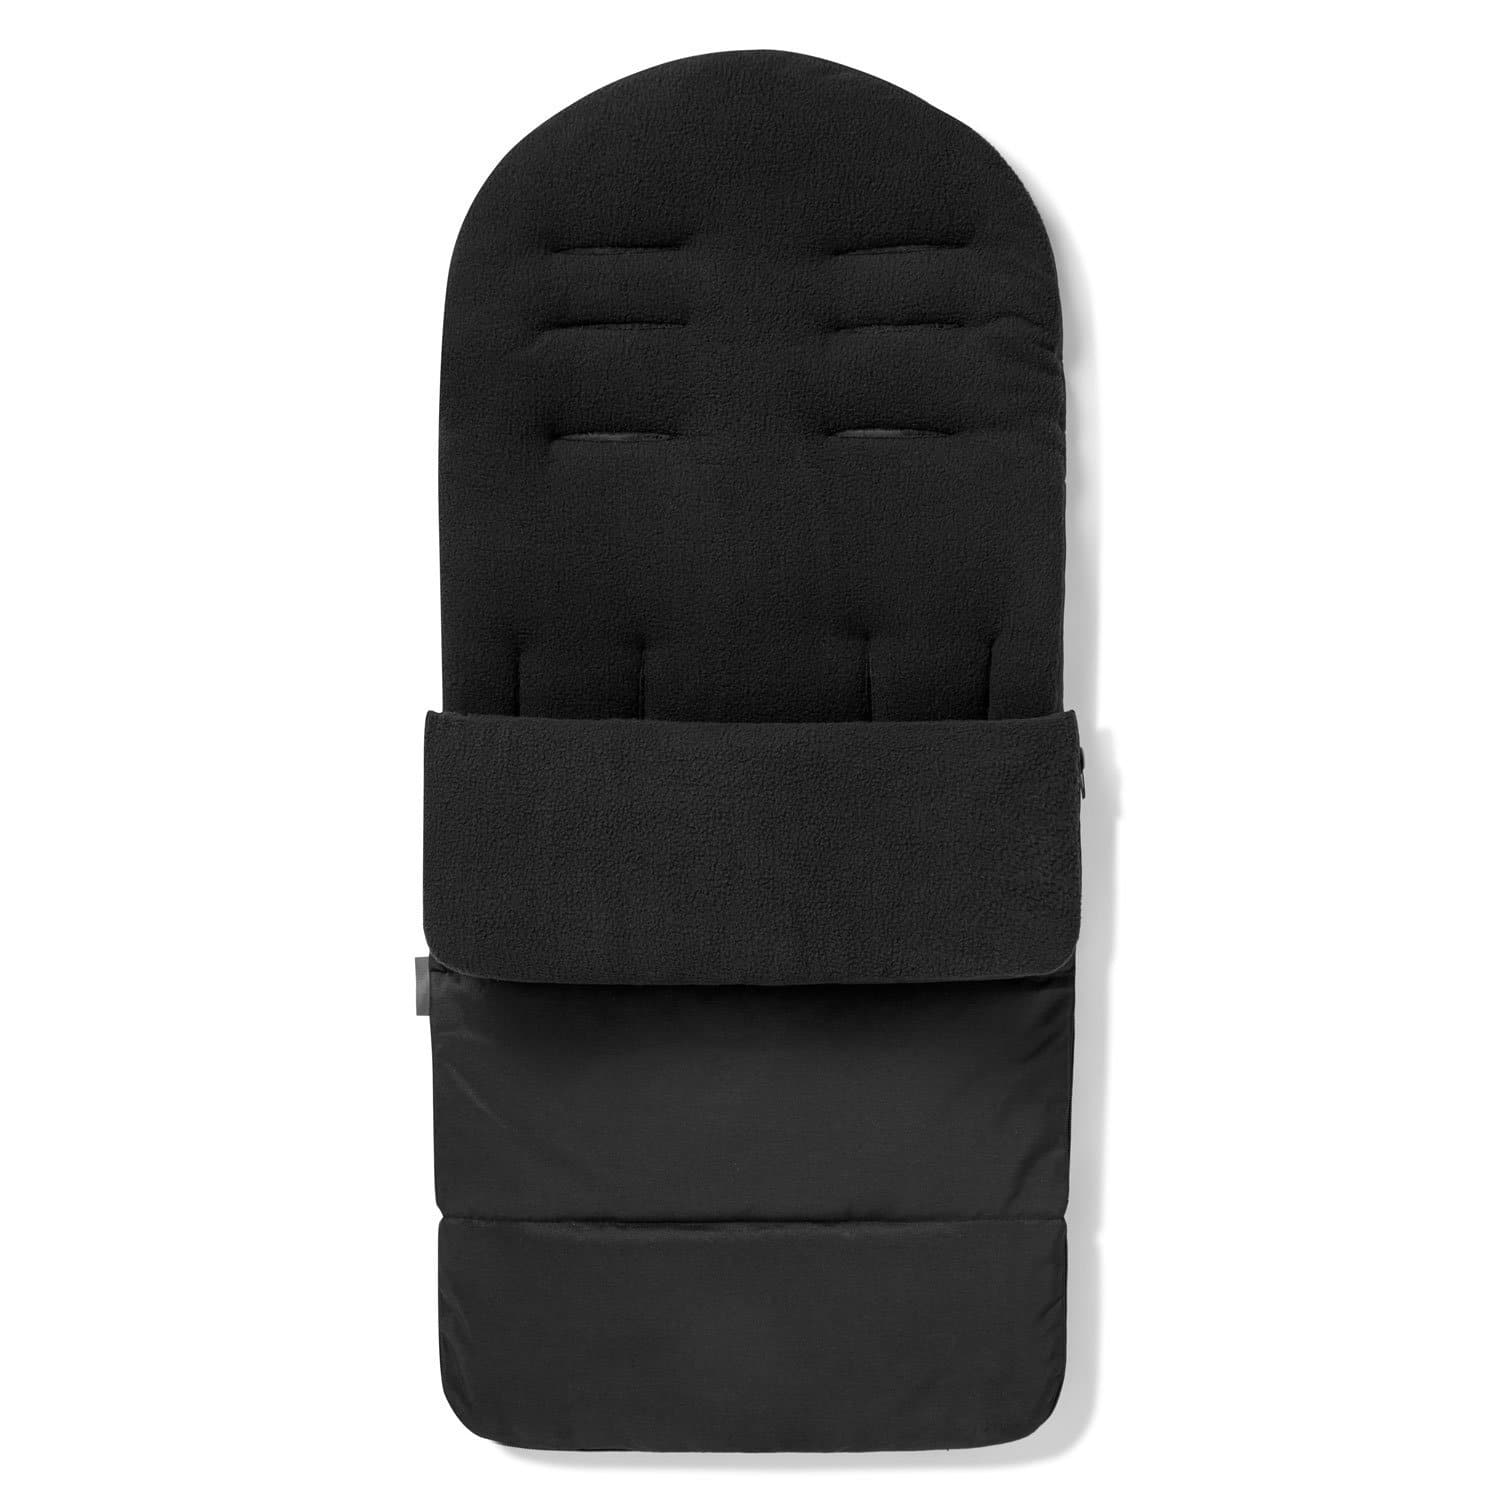 Premium Footmuff / Cosy Toes Compatible with Zeta - Black Jack / Fits All Models | For Your Little One